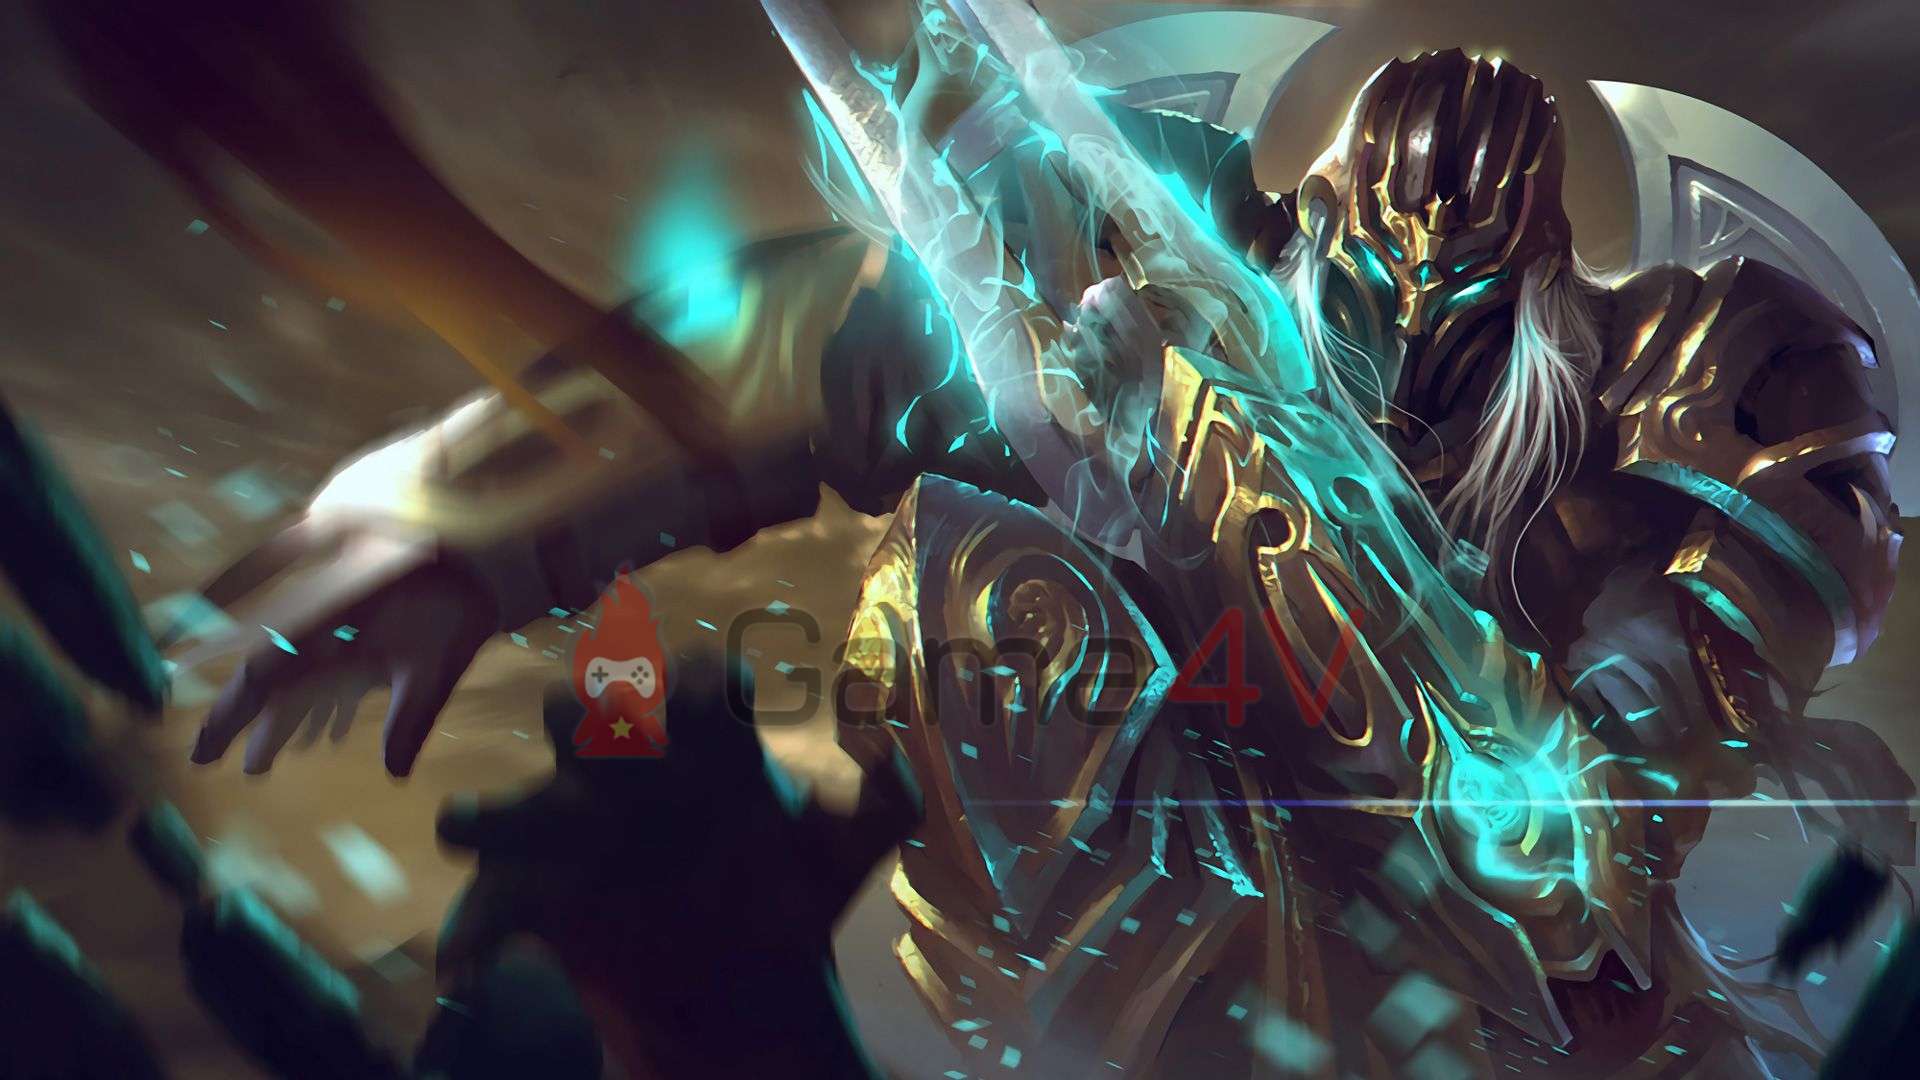 Rumored that the ranking reward for the 2023 season will be Glorious Zed